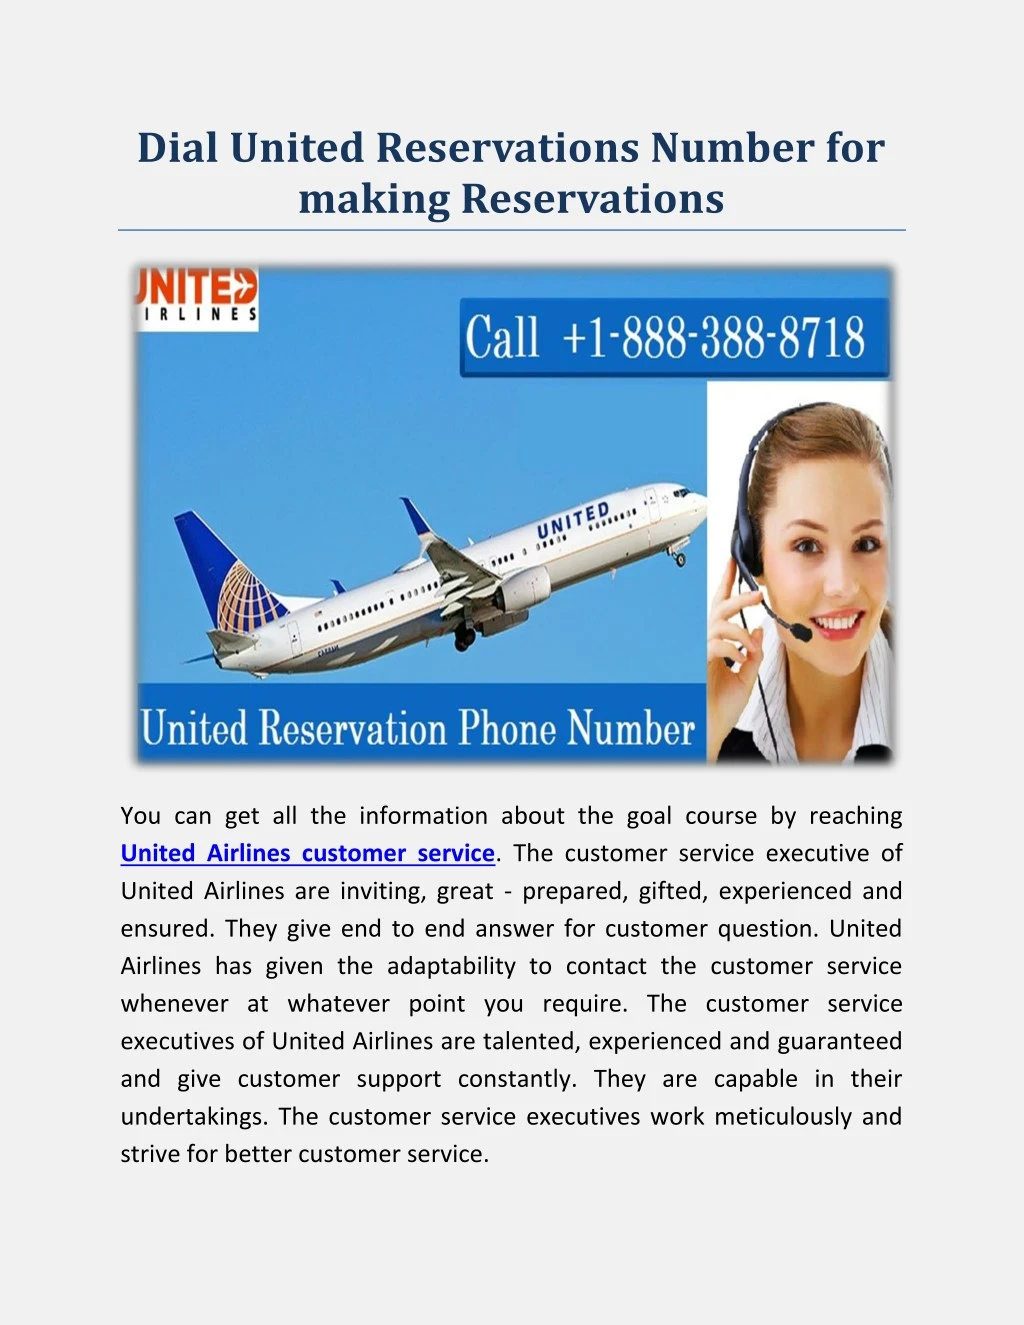 dial united reservations number for making